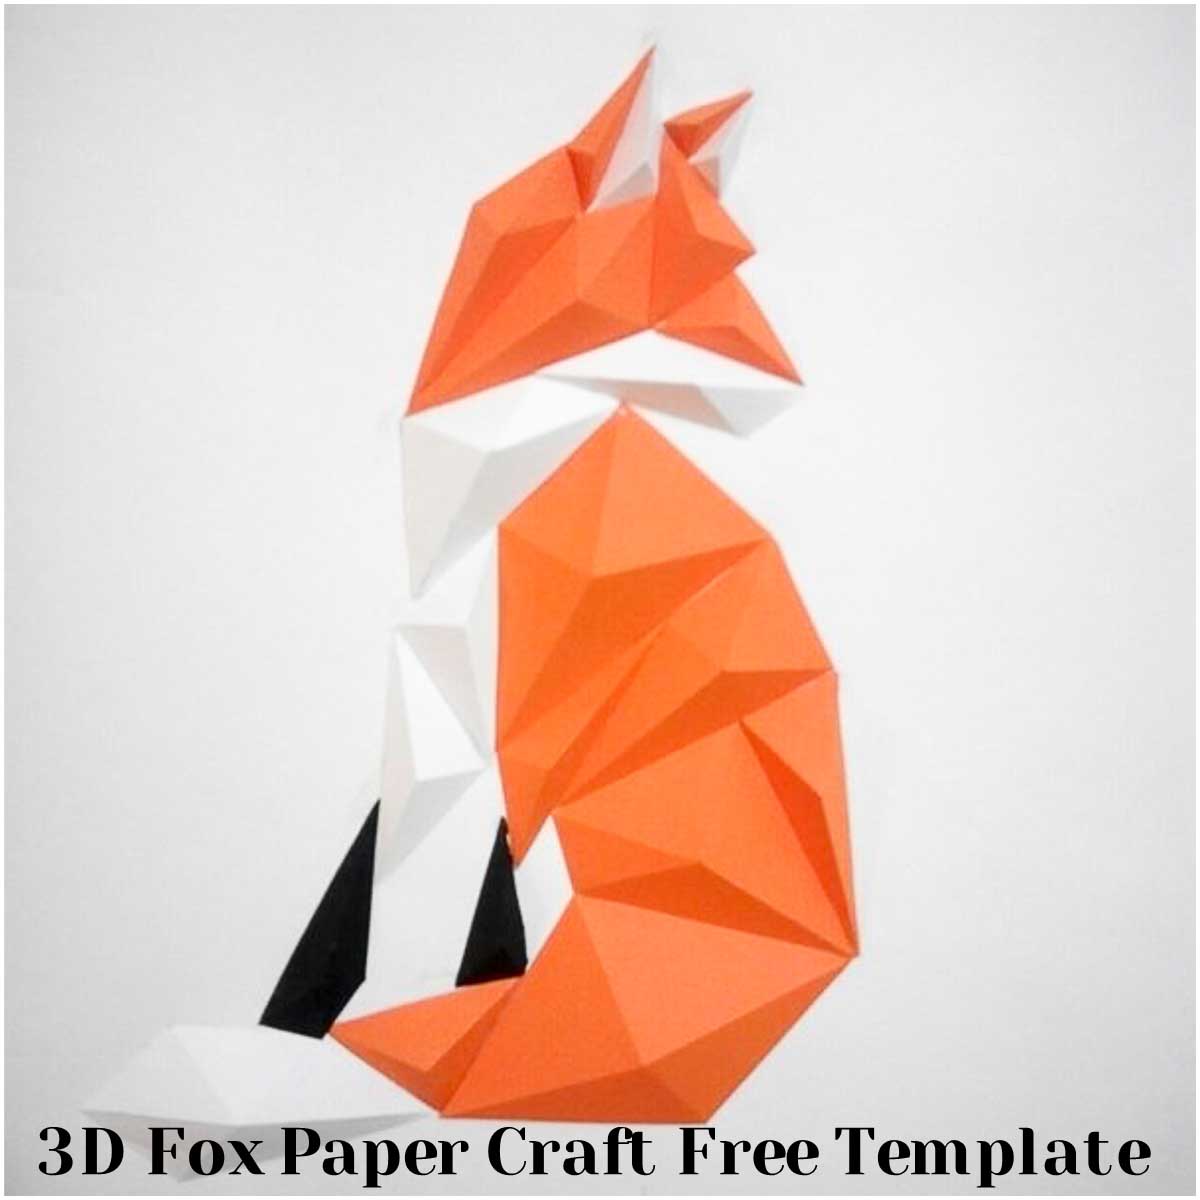 This paper model is a fox. You can download this paper template for